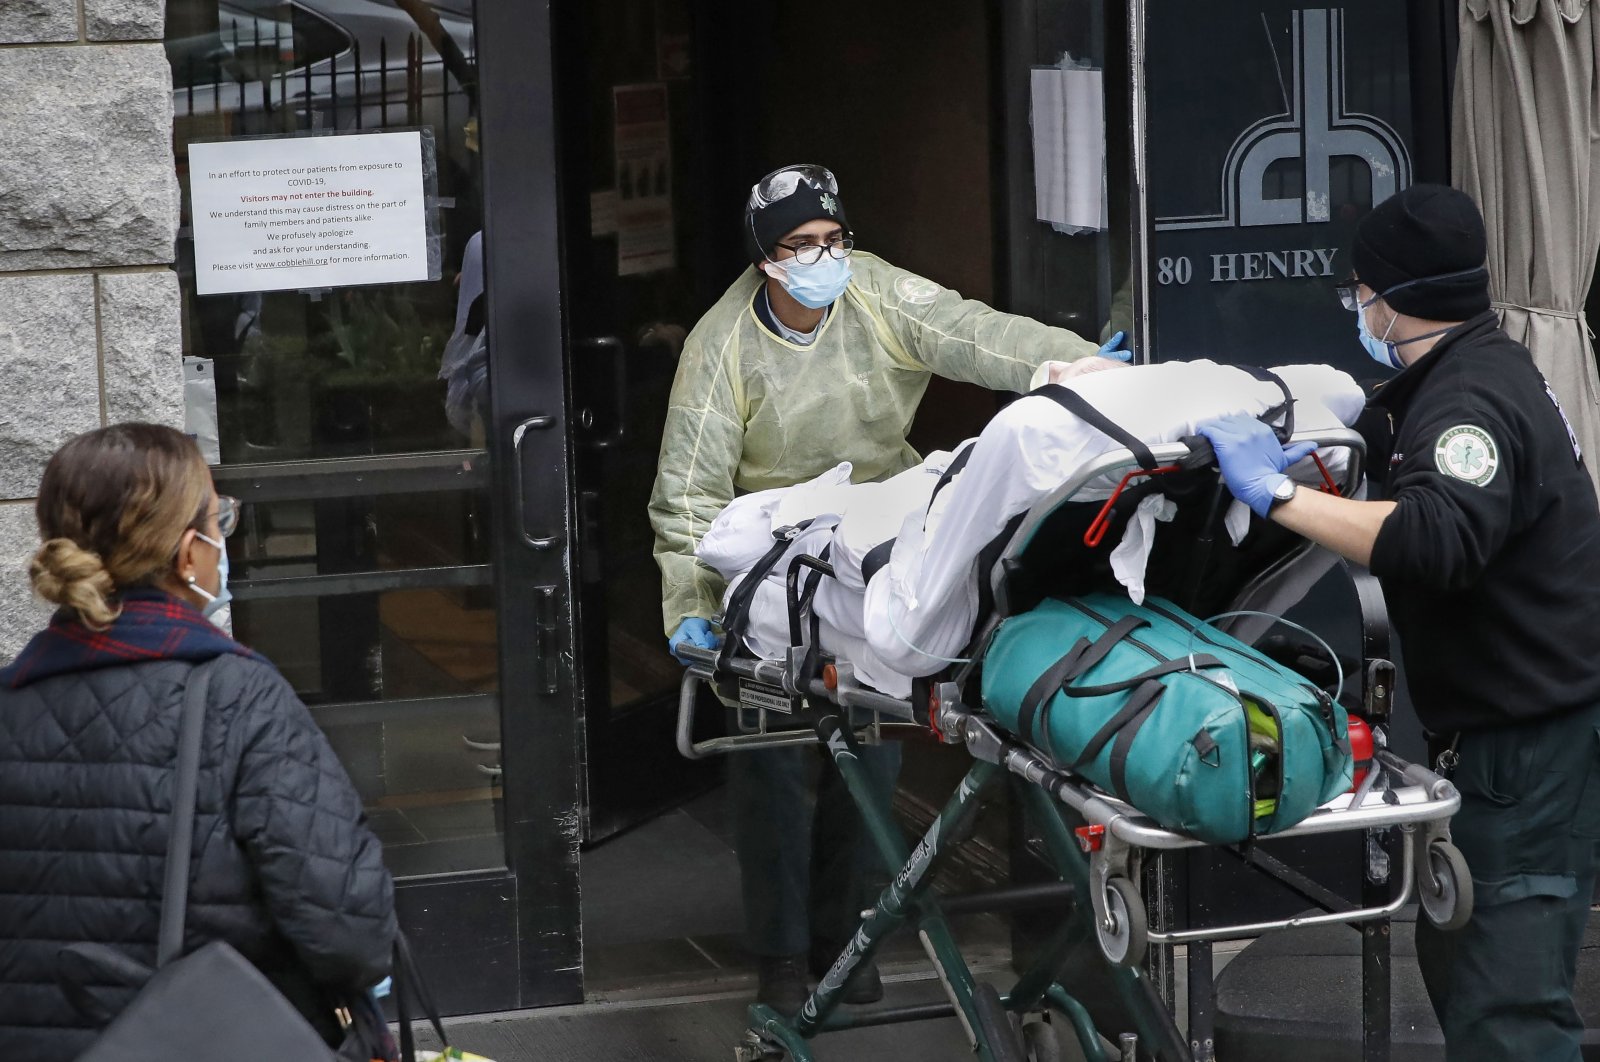 A patient is wheeled into Cobble Hill Health Center by emergency medical workers, in the Brooklyn borough of New York City, New York, U.S., on April 17, 2020. (AP Photo)